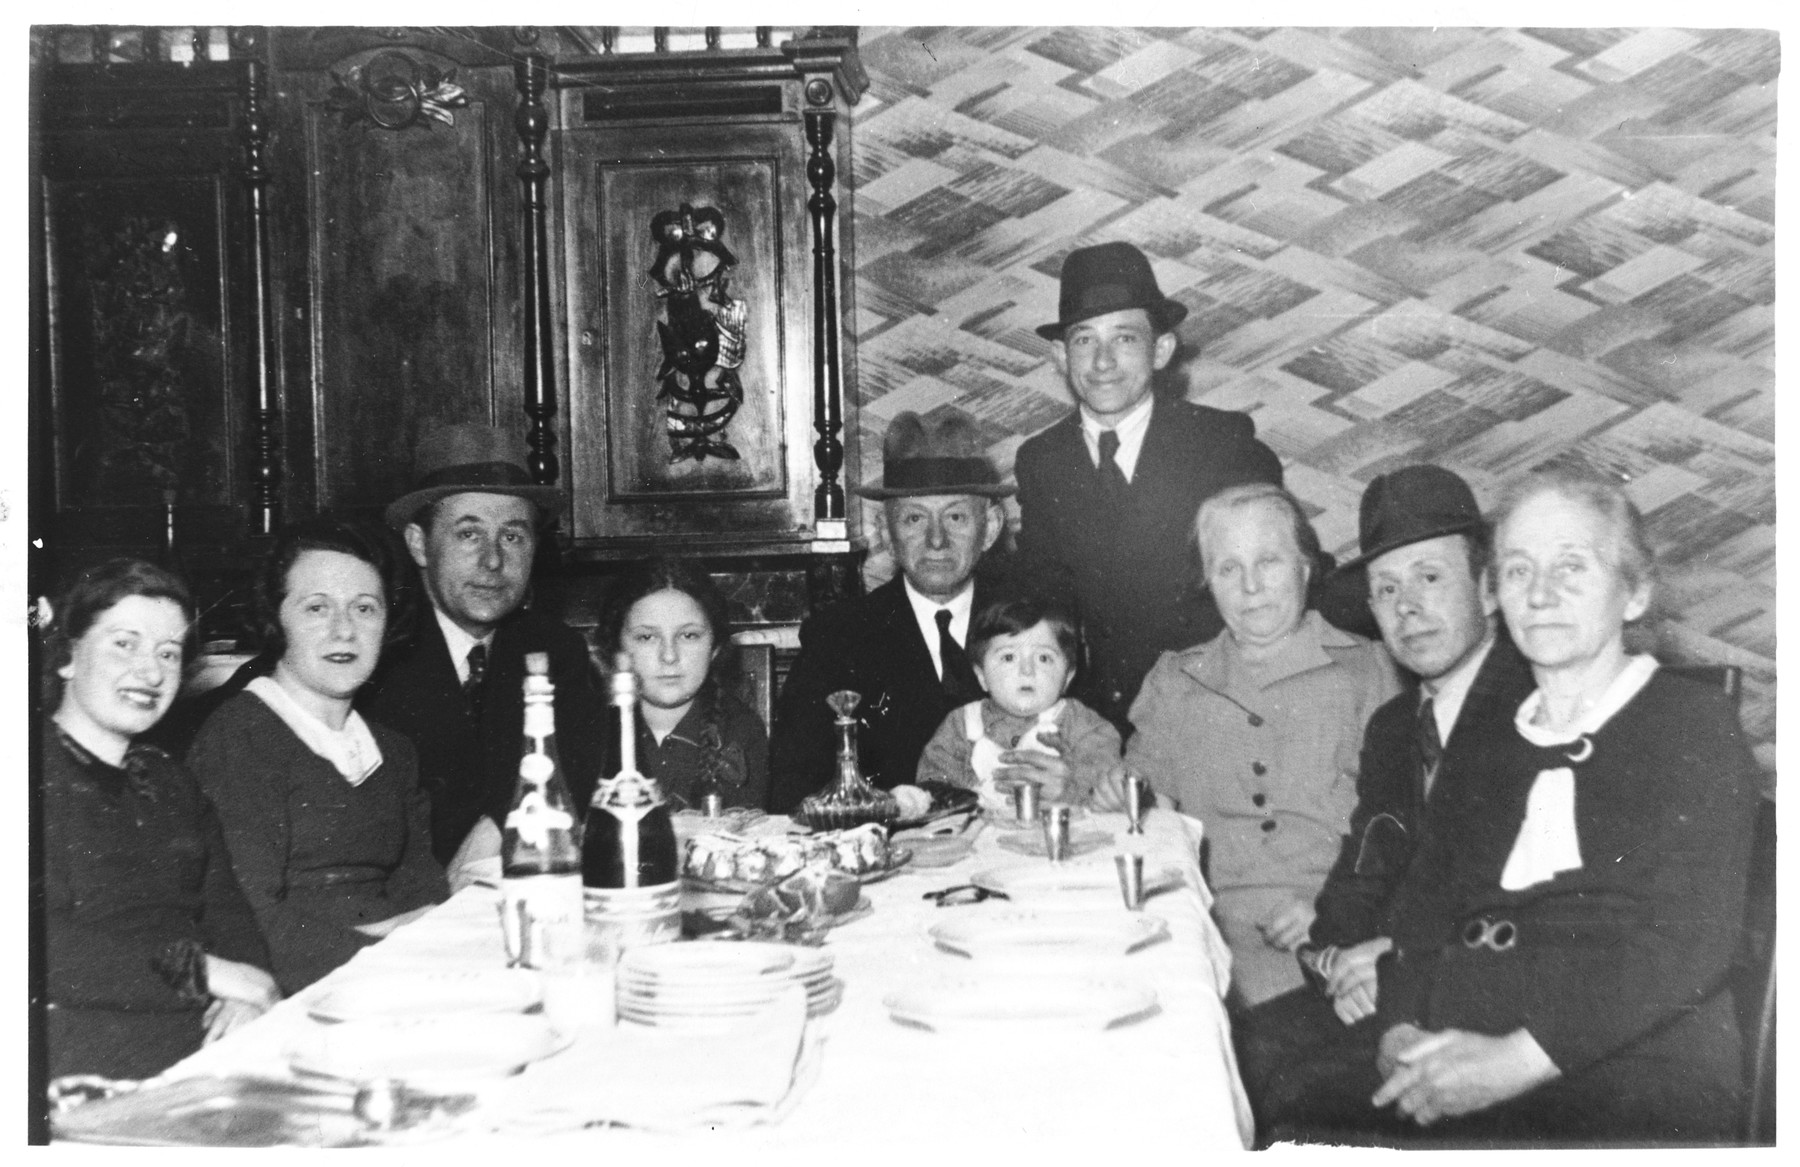 The Sztejnsznajd family celebrates its last seder in Luck prior to departing for America.

From right to left: a great-aunt, Avraham Gertner, Cipora Gertner, Yankel, Chaim Sztejnsznajd, Moshe Gertner, Sara Sztejnsznajd, Josef Sztejnsznajd, Goldie Sztejnsznajd, and a cousin also named Goldie.